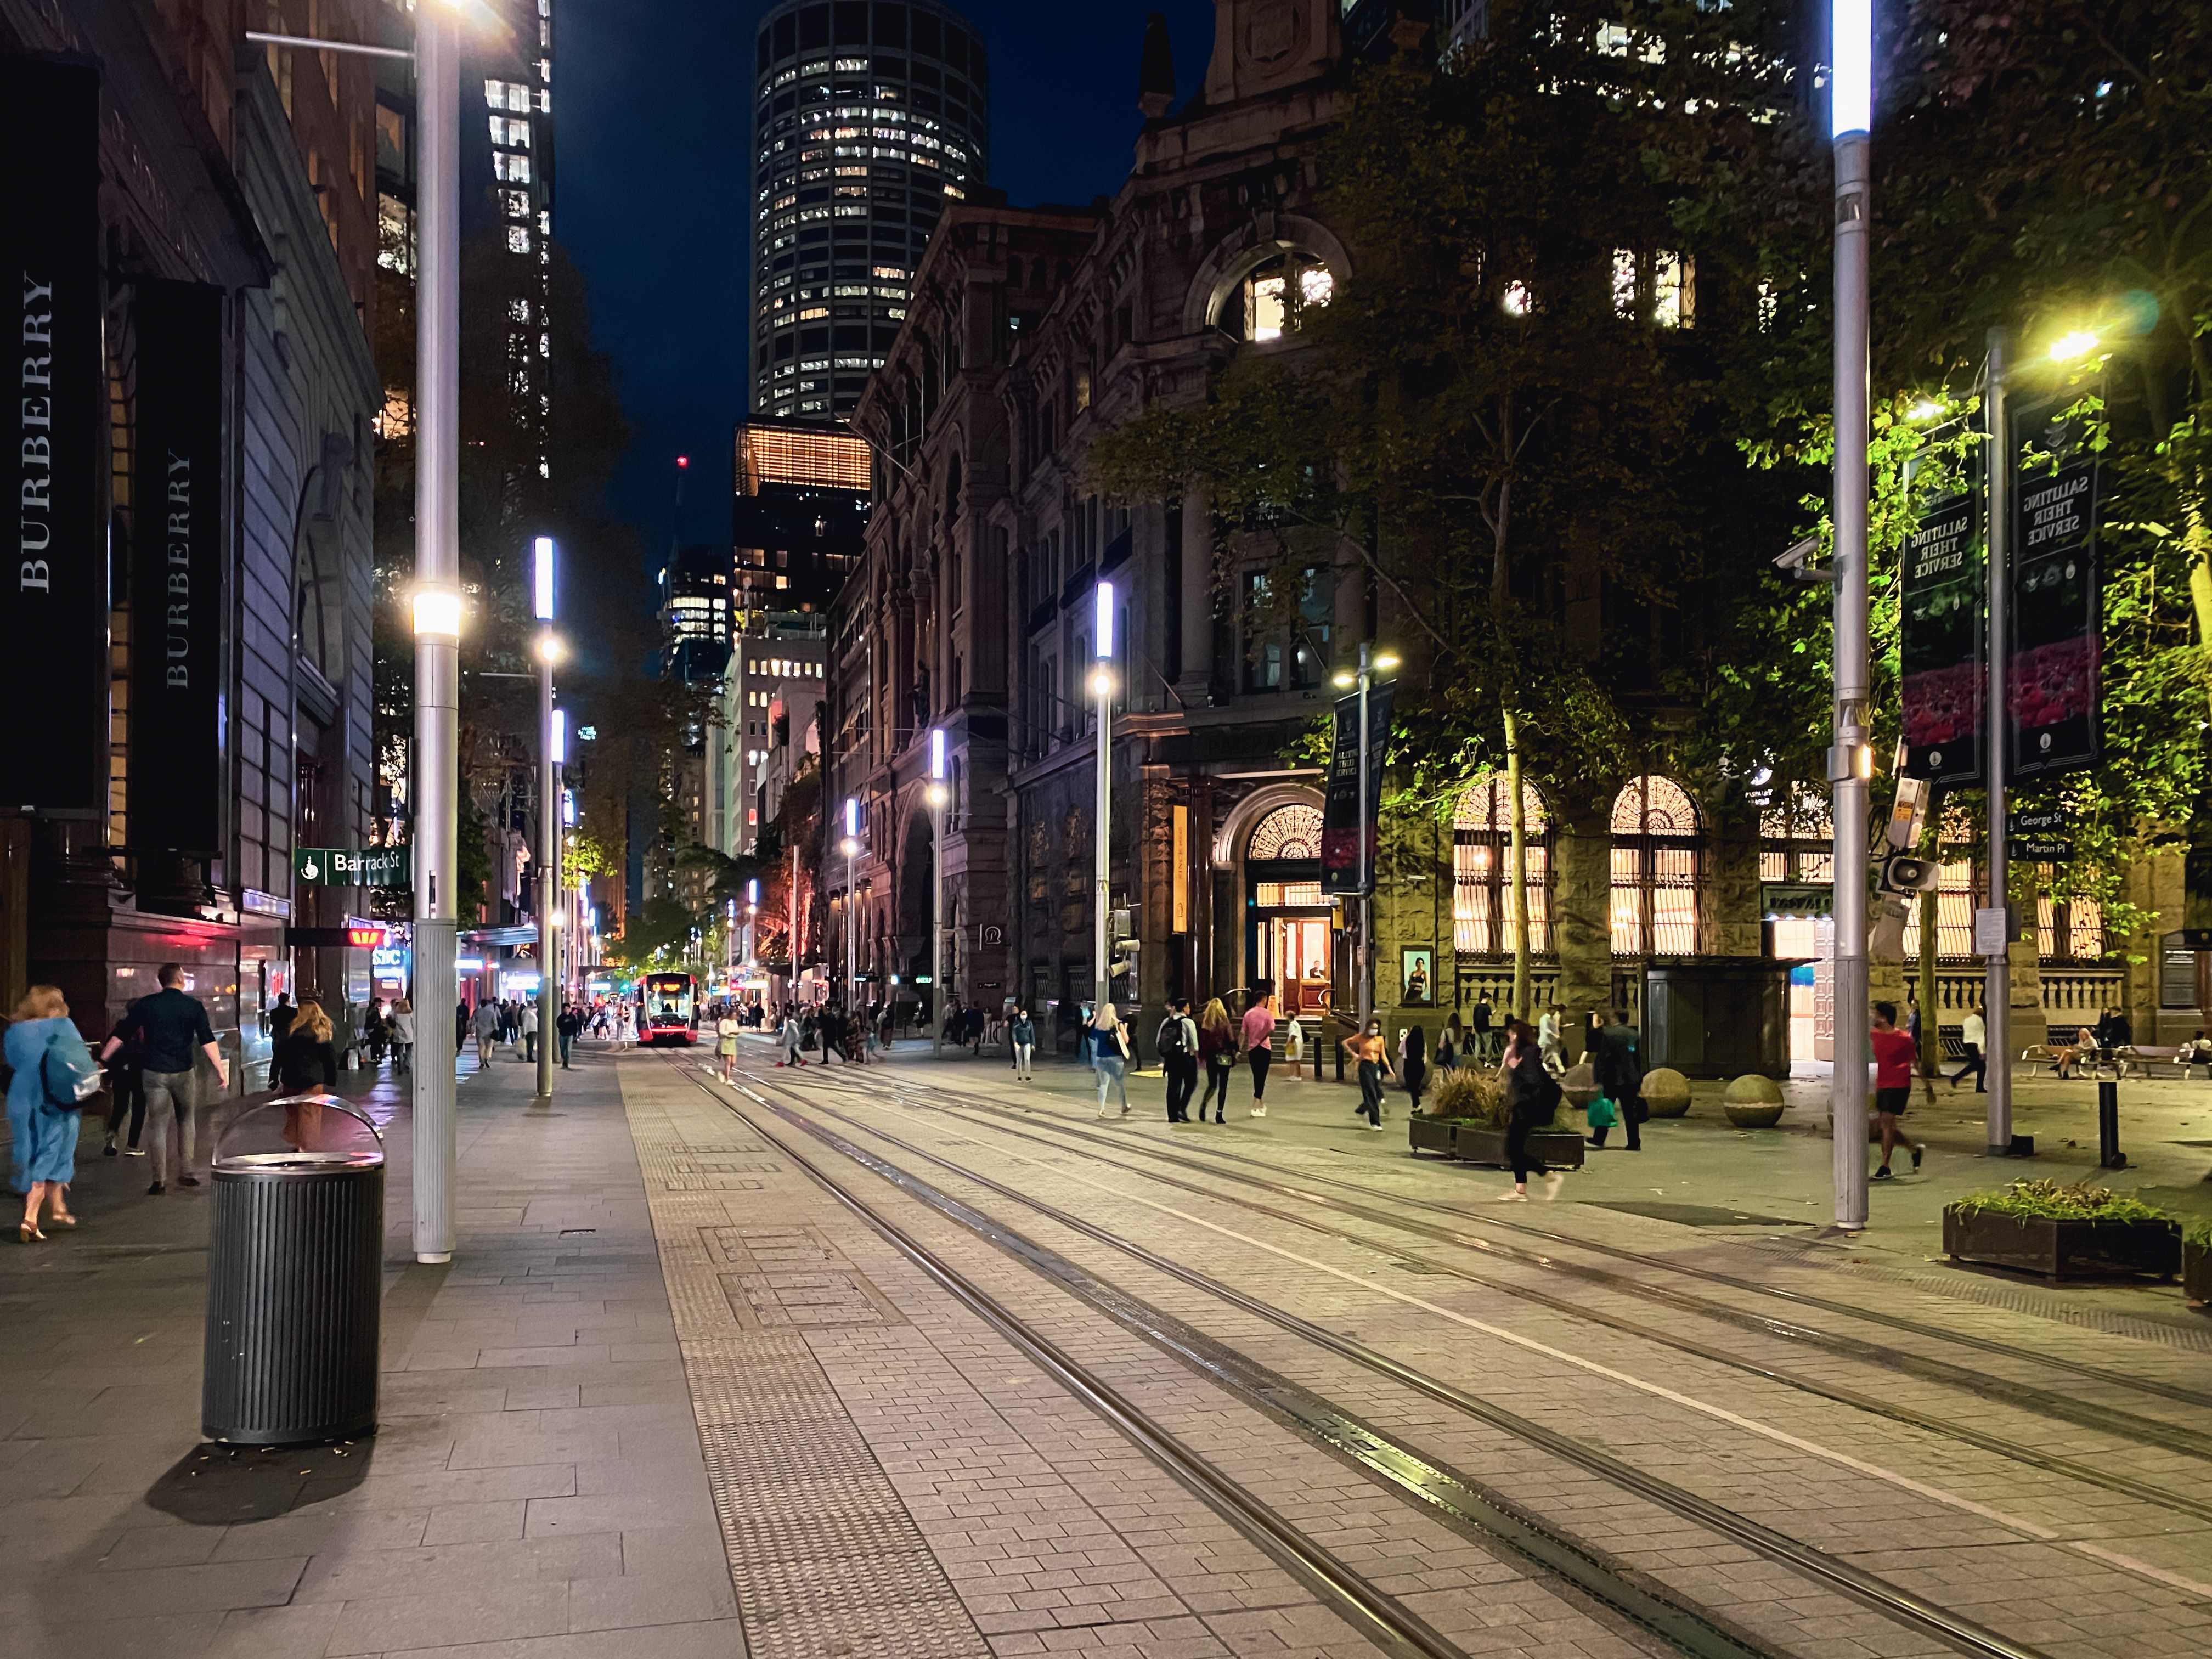 A photo looking down George St in Sydney. Tram tracks run down the middle of the road, there's people everywhere, and the buildings are a mix of old and new.